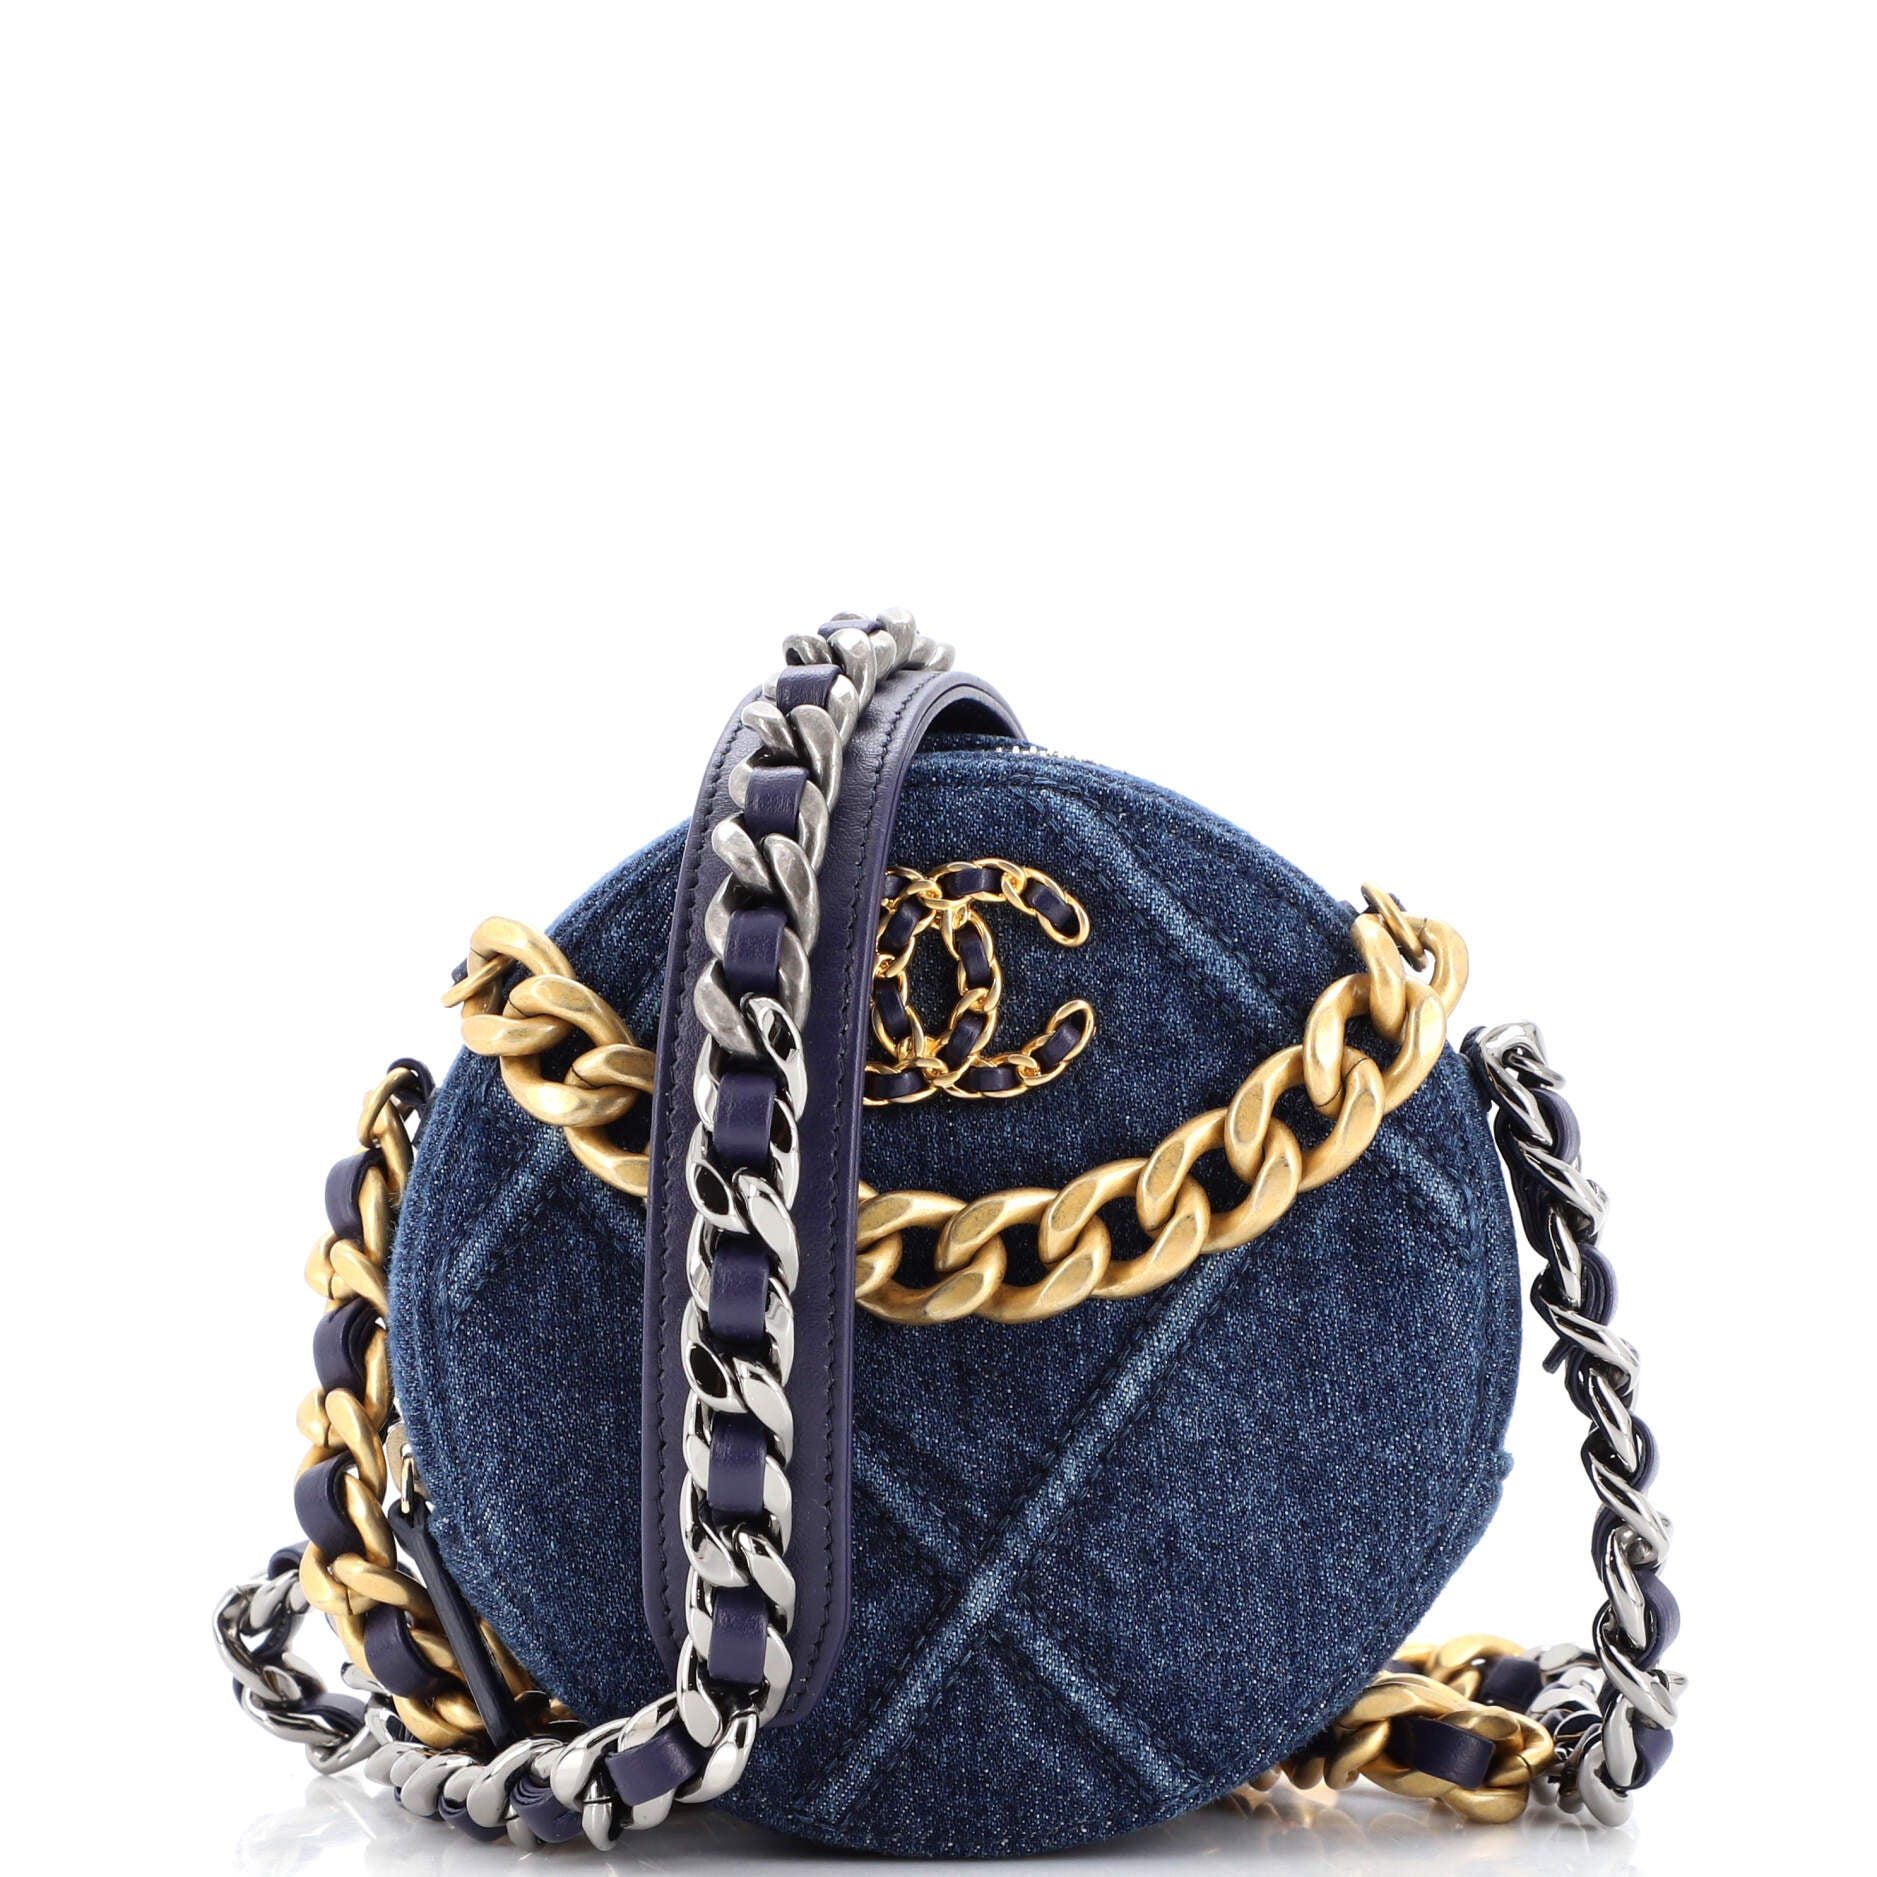 19 Round Clutch with Chain Quilted Leather